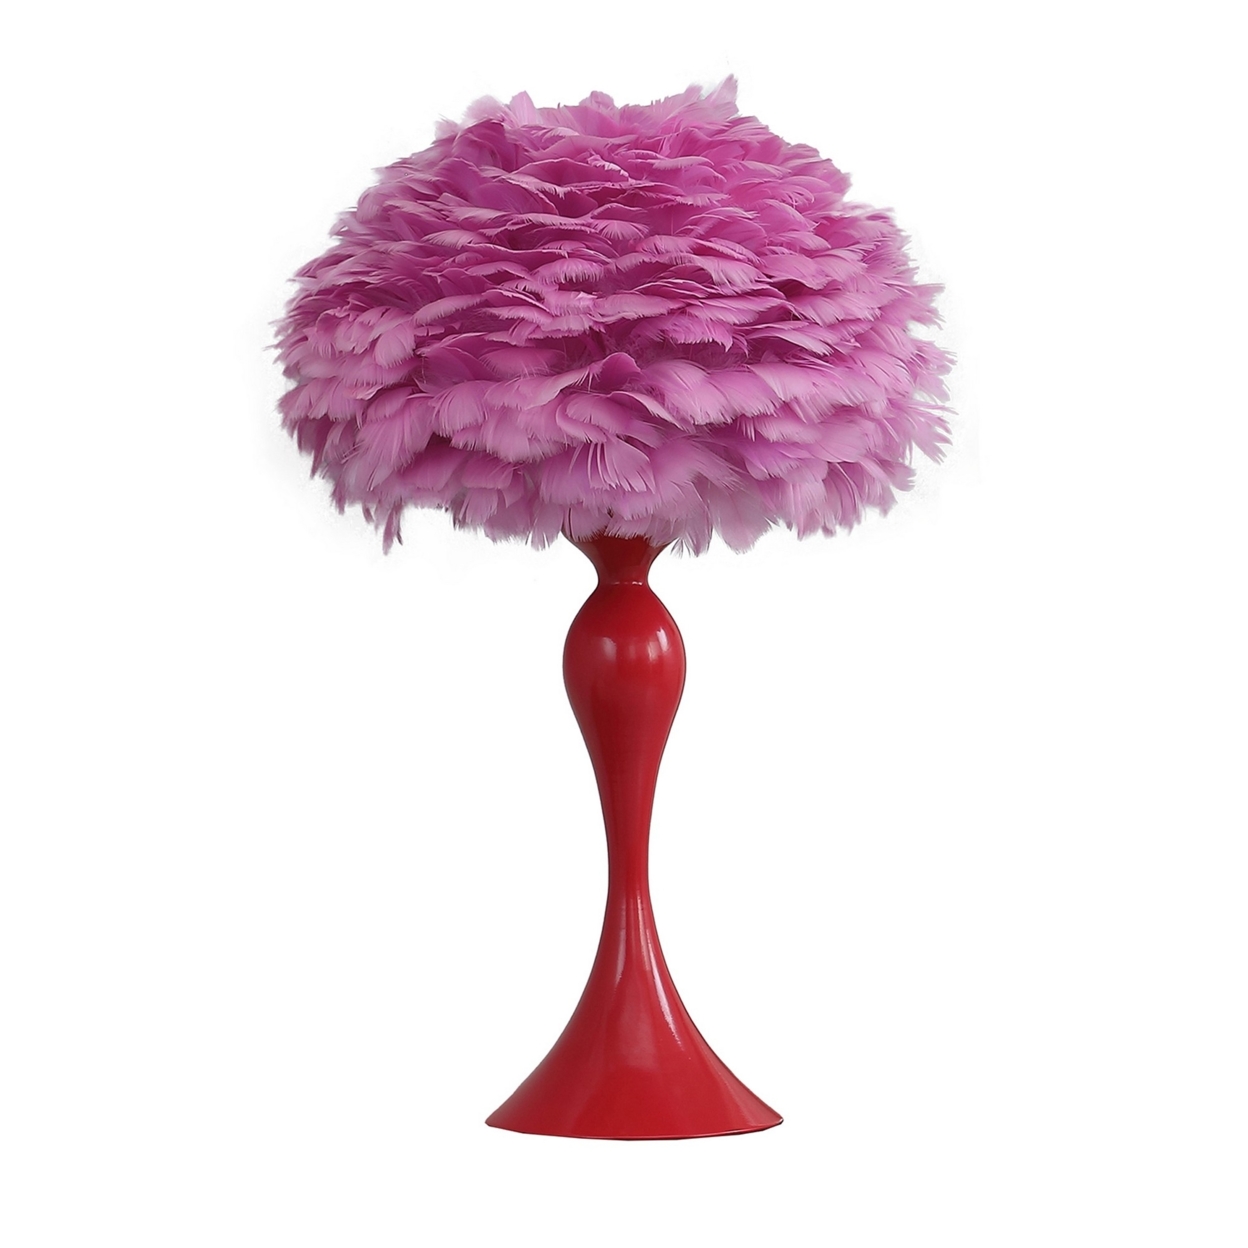 Lily 24 Inch Metal Glam Feather Table Lamp, Candlestick, 40W, Pink, Red- Saltoro Sherpi